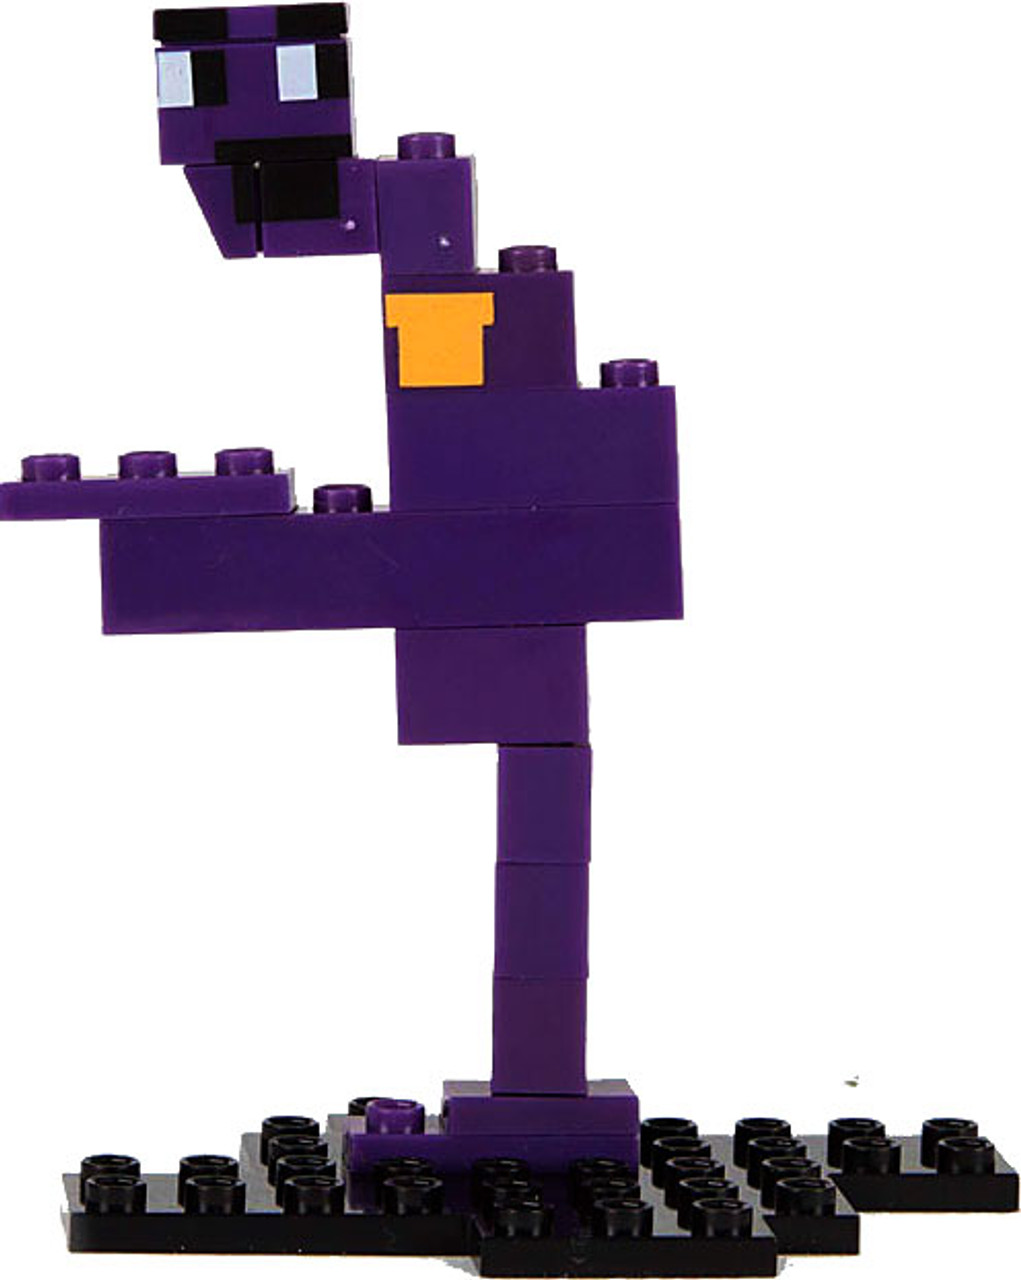 Mcfarlane Toys Five Nights At Freddys 8 Bit Series 1 Purple Guy Buildable Figure 12045 Golden Freddy Piece Toywiz - golden 2the roleplay location a fnaf roleplay roblox